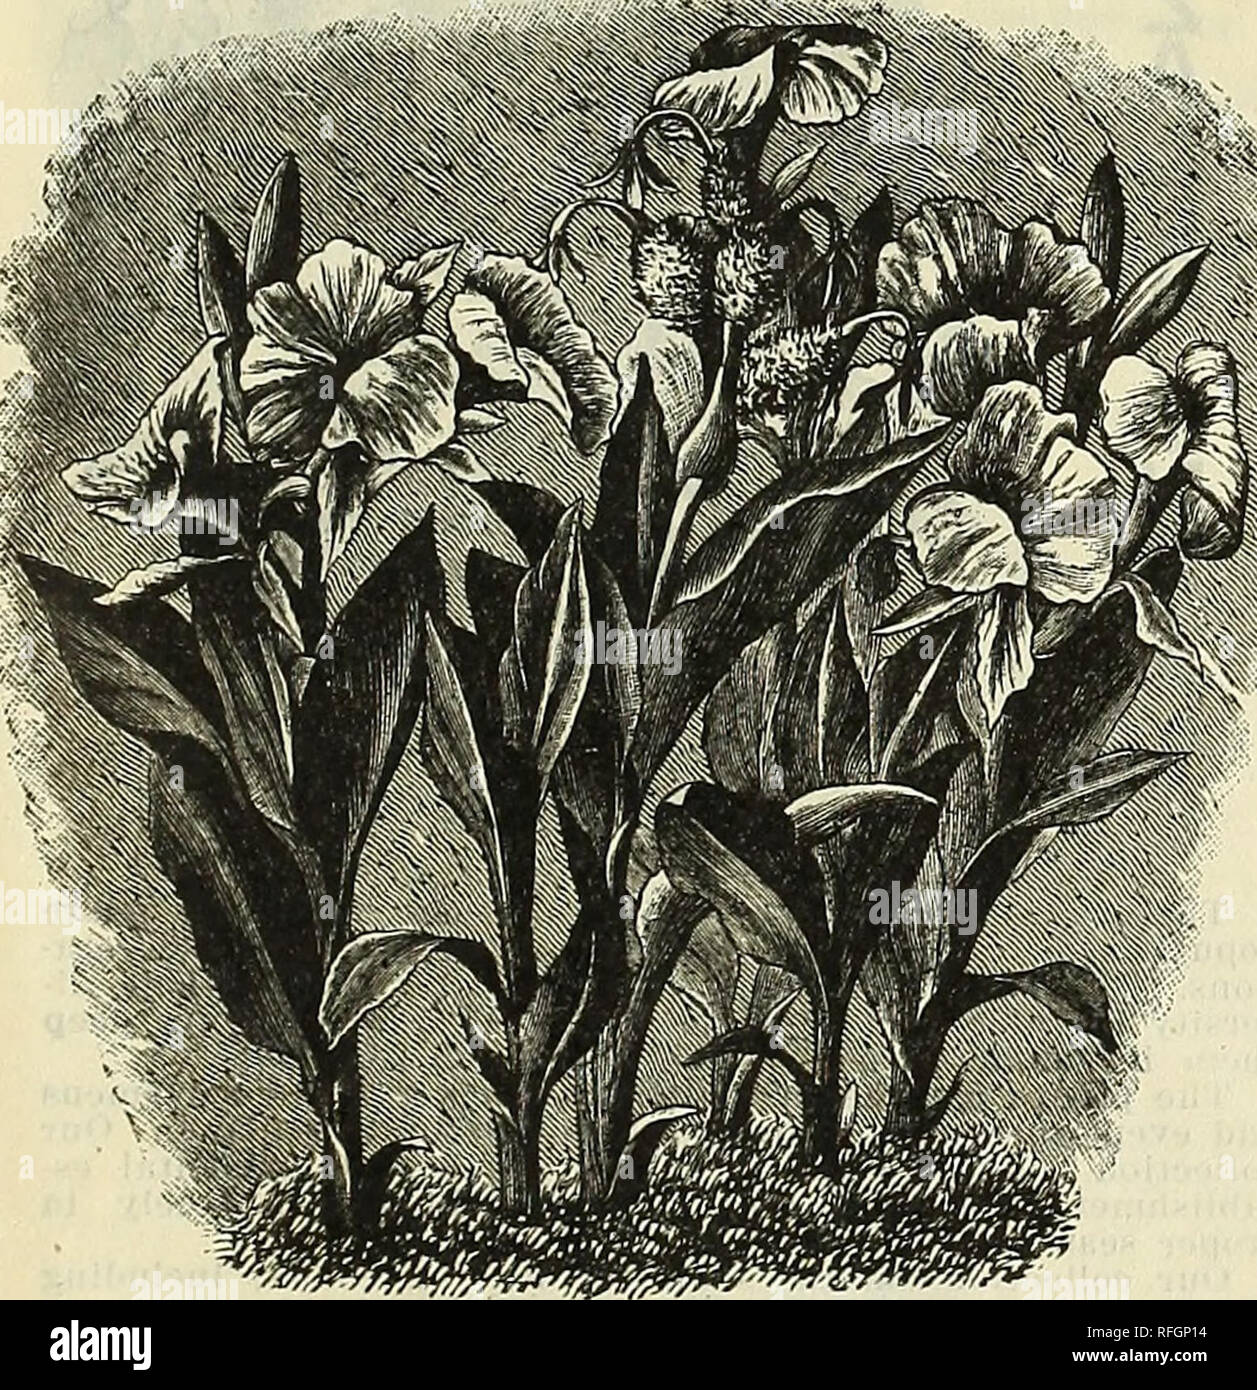 . Jubilee floral catalogue. Nurseries (Horticulture) Kentucky Louisville Catalogs; Plants, Ornamental Catalogs; Flowers Catalogs; Trees Seedlings Catalogs. NANZ &amp; NEUNER'S PALL PRICE LIST, LOUISVILLE, KY. 7 MISCELLANEOUS. BULBS AND ROOTS. Each. Doz. ALLIUM NEAPOLITANIUM. A favorite flower forcing in pots: white $0 05 $0 50 ANEMONE. Blue, scarlet, red, rose, striped; each color or mixed 05 50 ACHIMENES. Mixed 10 1 00 ASTILBE (Spirea) 25 2 50 ANEMONE. Double; line, bright colors 10 100 AGAPANTHUS UMBELLATUS, Blue and white; for pot culture; 25 to 50 cents each. DIELYTRA SPEOTABIL1S. Bleeding Stock Photo